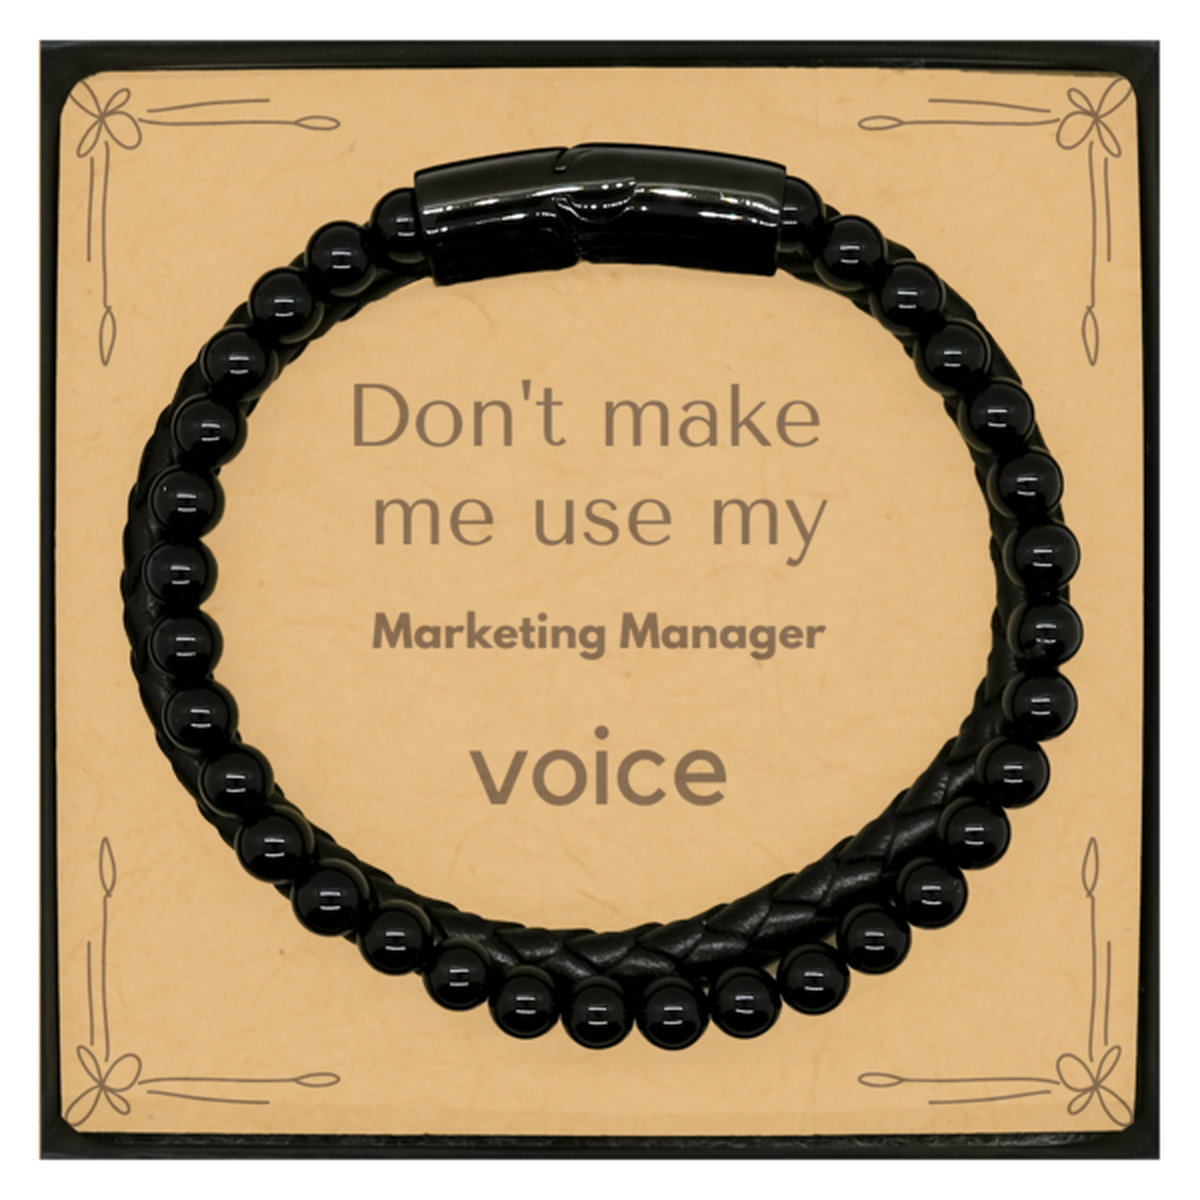 Don't make me use my Marketing Manager voice, Sarcasm Marketing Manager Card Gifts, Christmas Marketing Manager Stone Leather Bracelets Birthday Unique Gifts For Marketing Manager Coworkers, Men, Women, Colleague, Friends